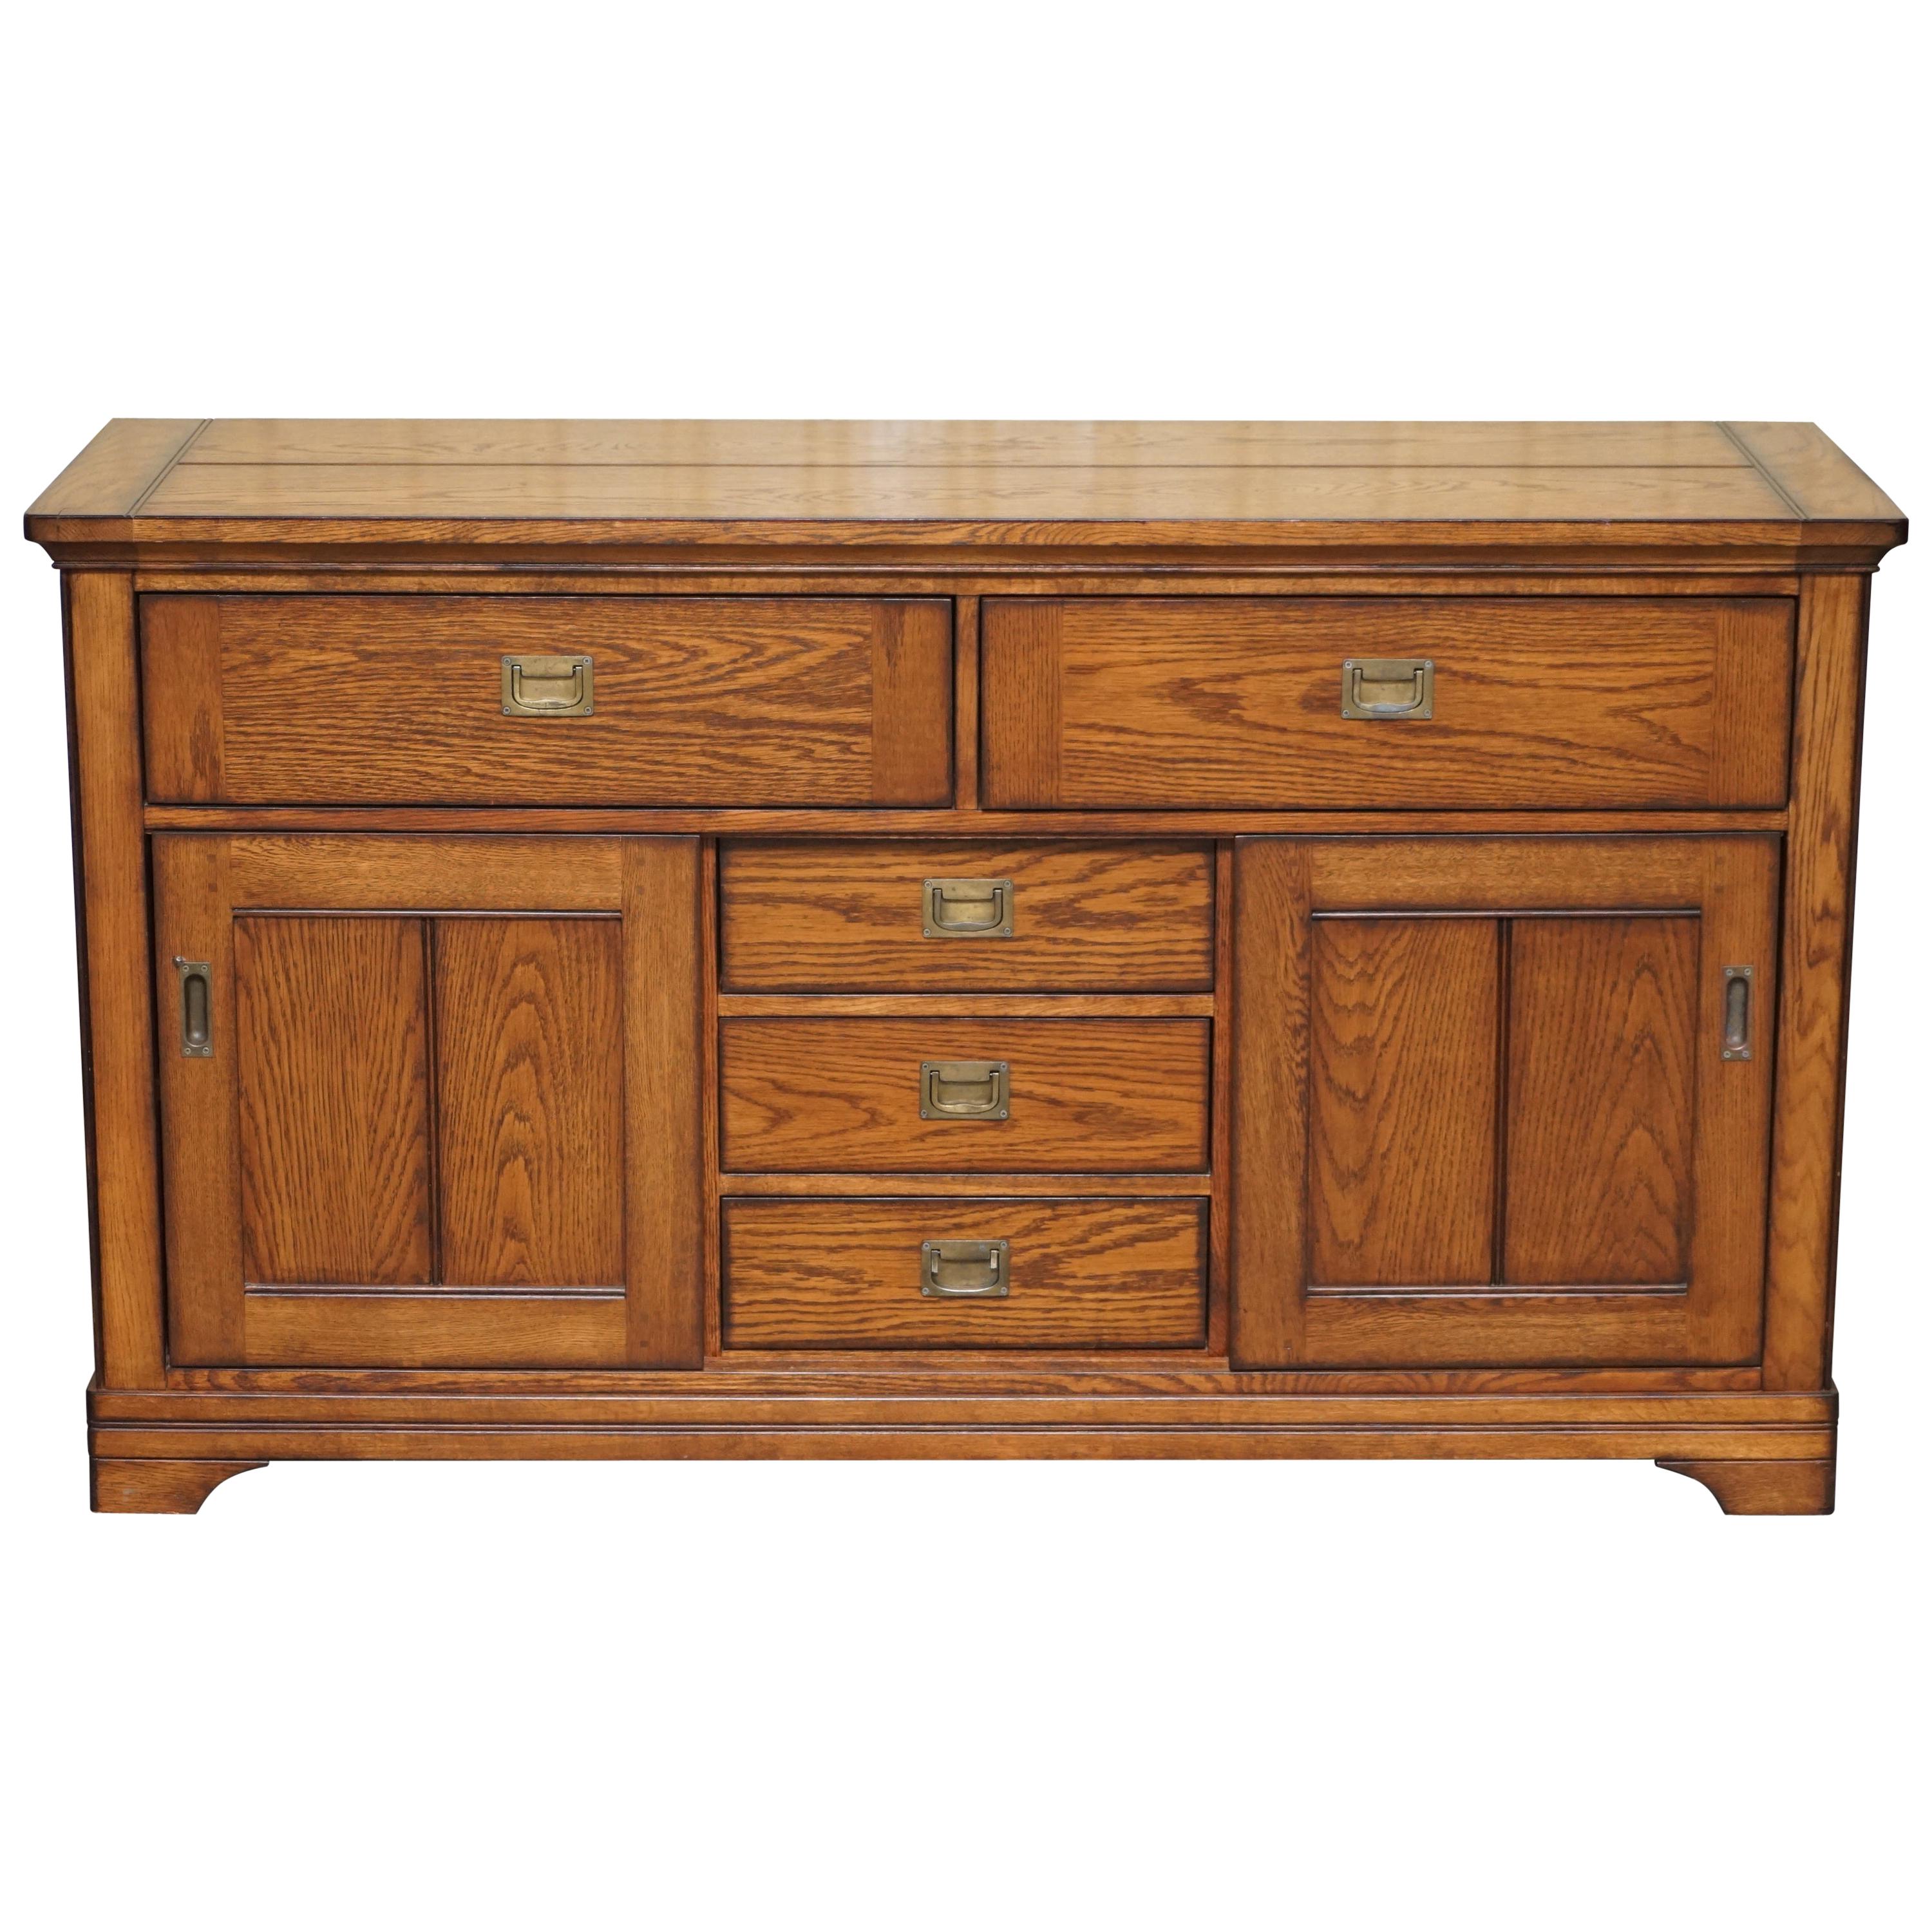 Stunning Solid Oak Vintage Campaign Style Sideboard with Drawers and Cupboards